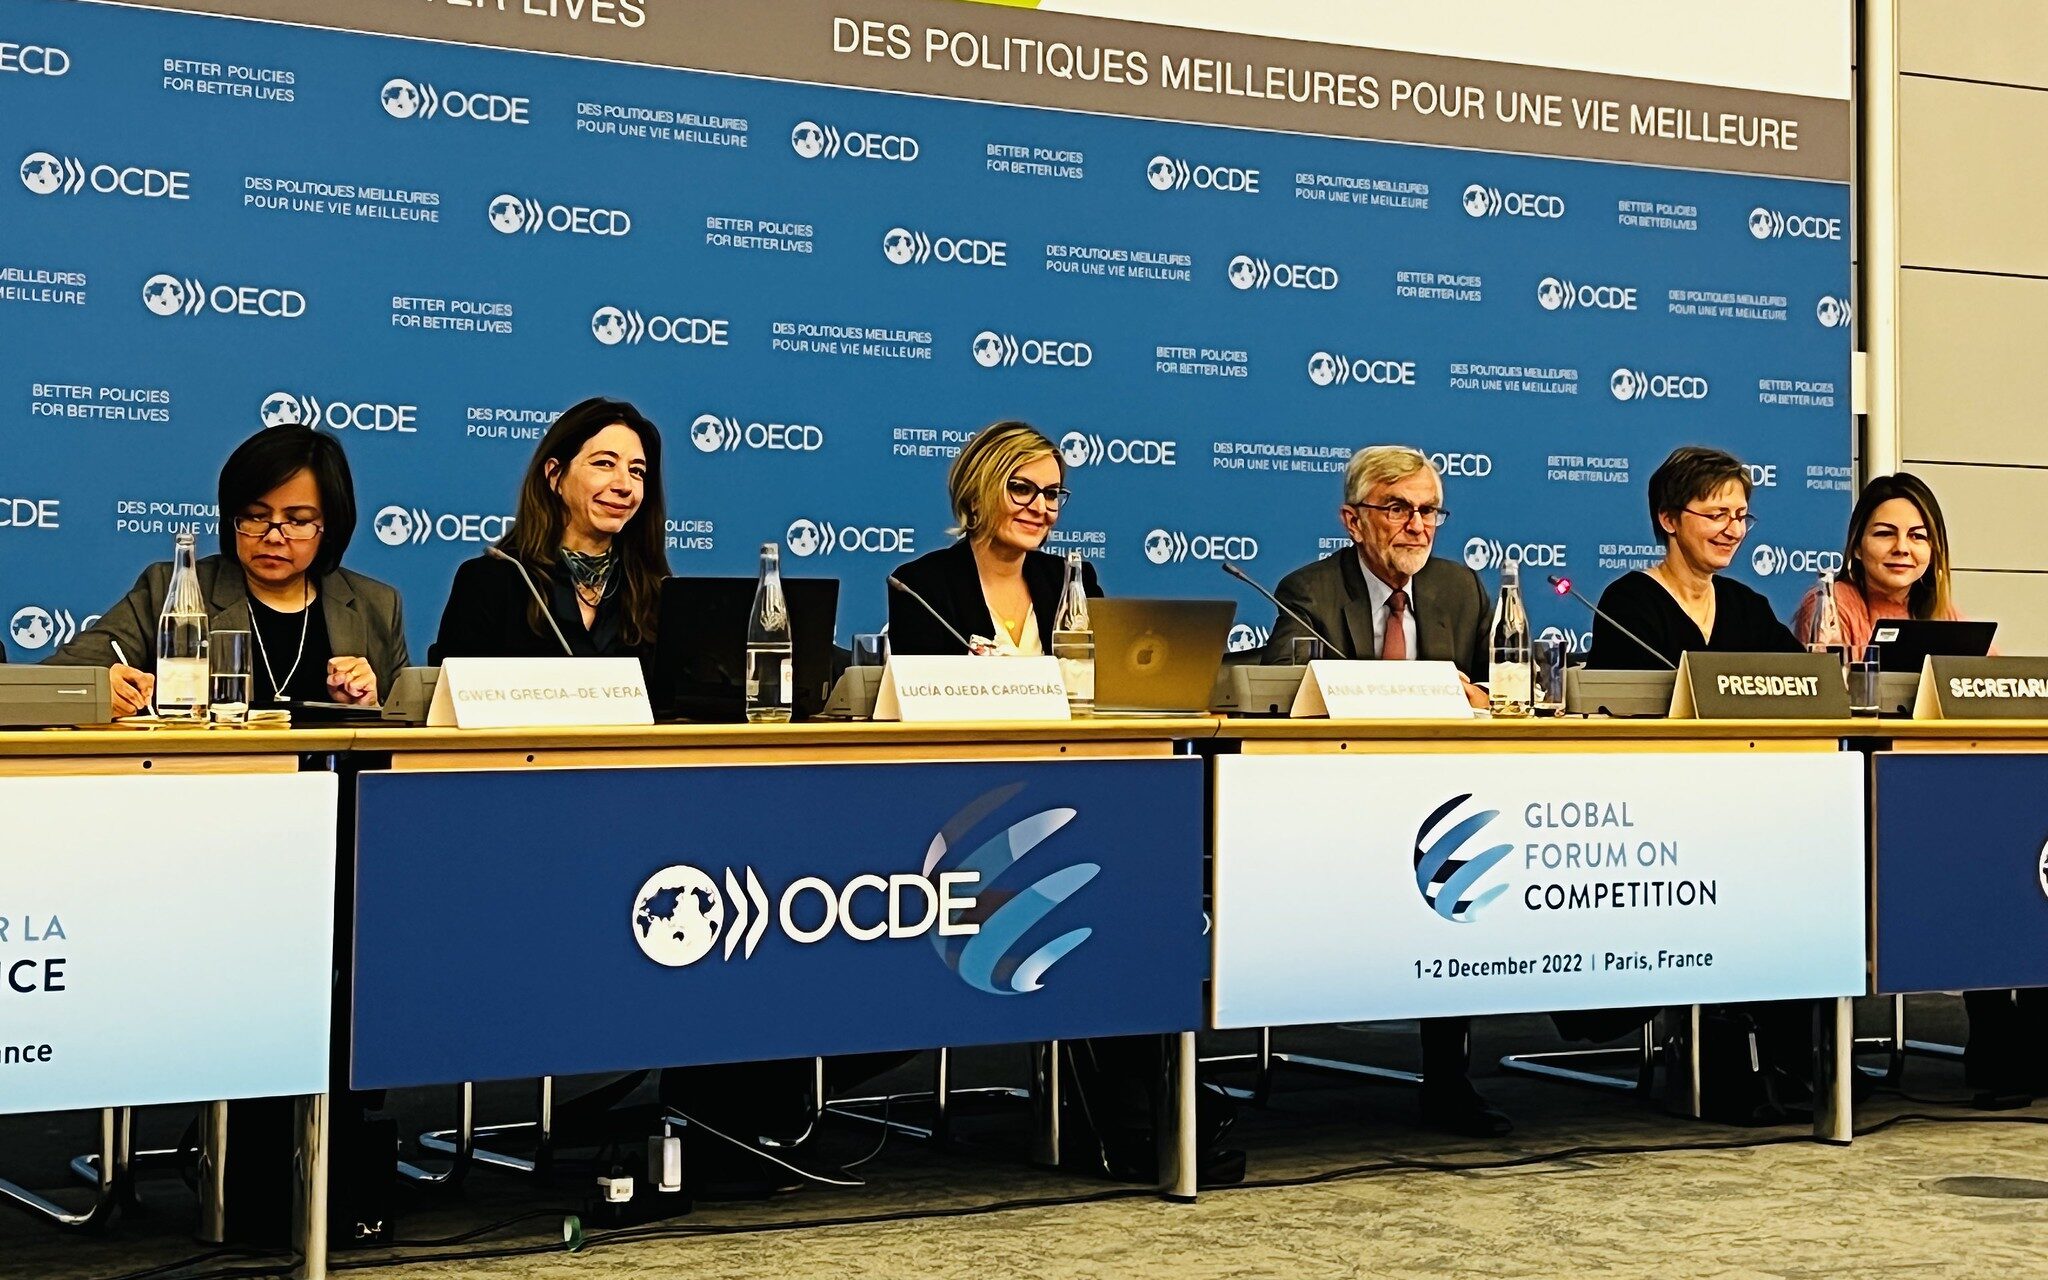 Anna Pisarkiewicz speaks at the OECD Global Forum on Competition